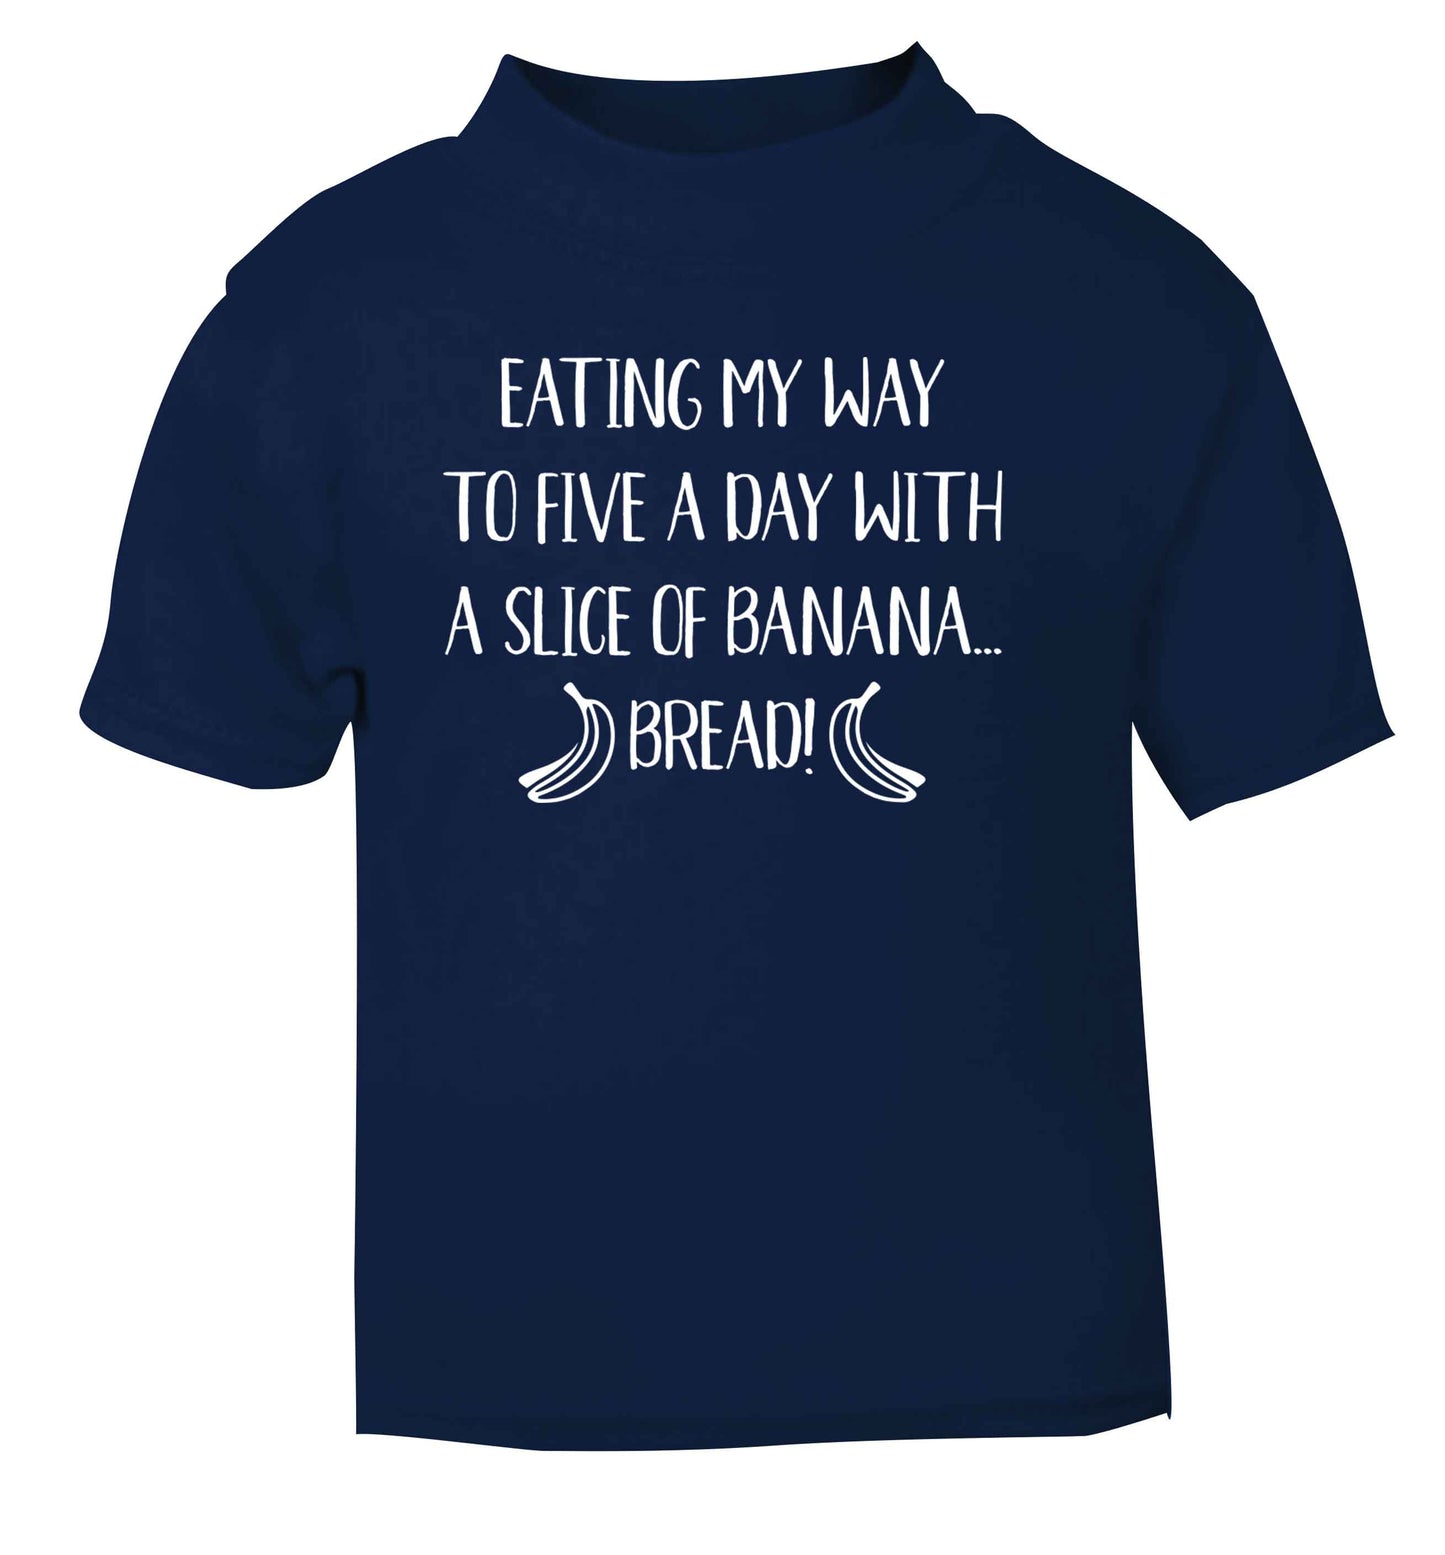 Eating my way to five a day with a slice of banana bread navy Baby Toddler Tshirt 2 Years